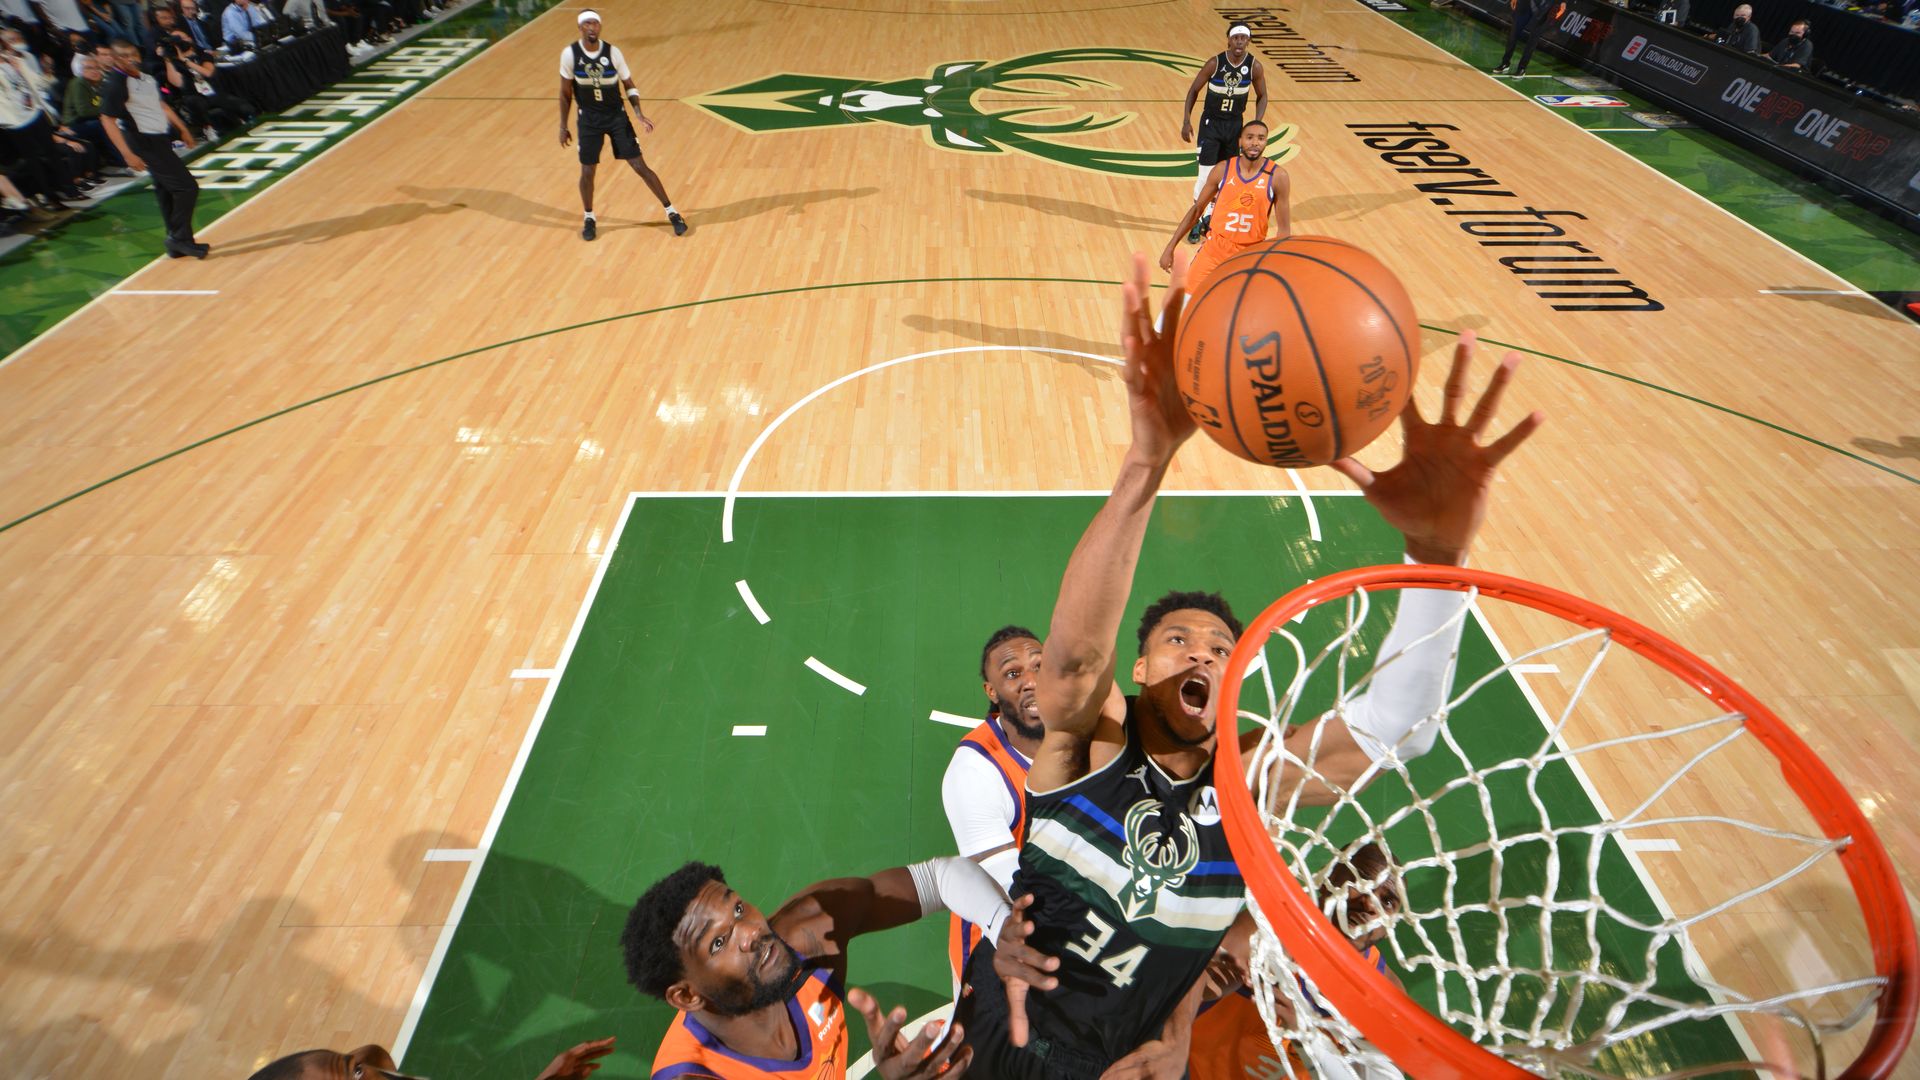 Giannis Antetokounmpo, in a green jersey, #34 of the Milwaukee Bucks, jumps to dunk a basketball into a hoop above Phoenix Suns players in orange uniforms.